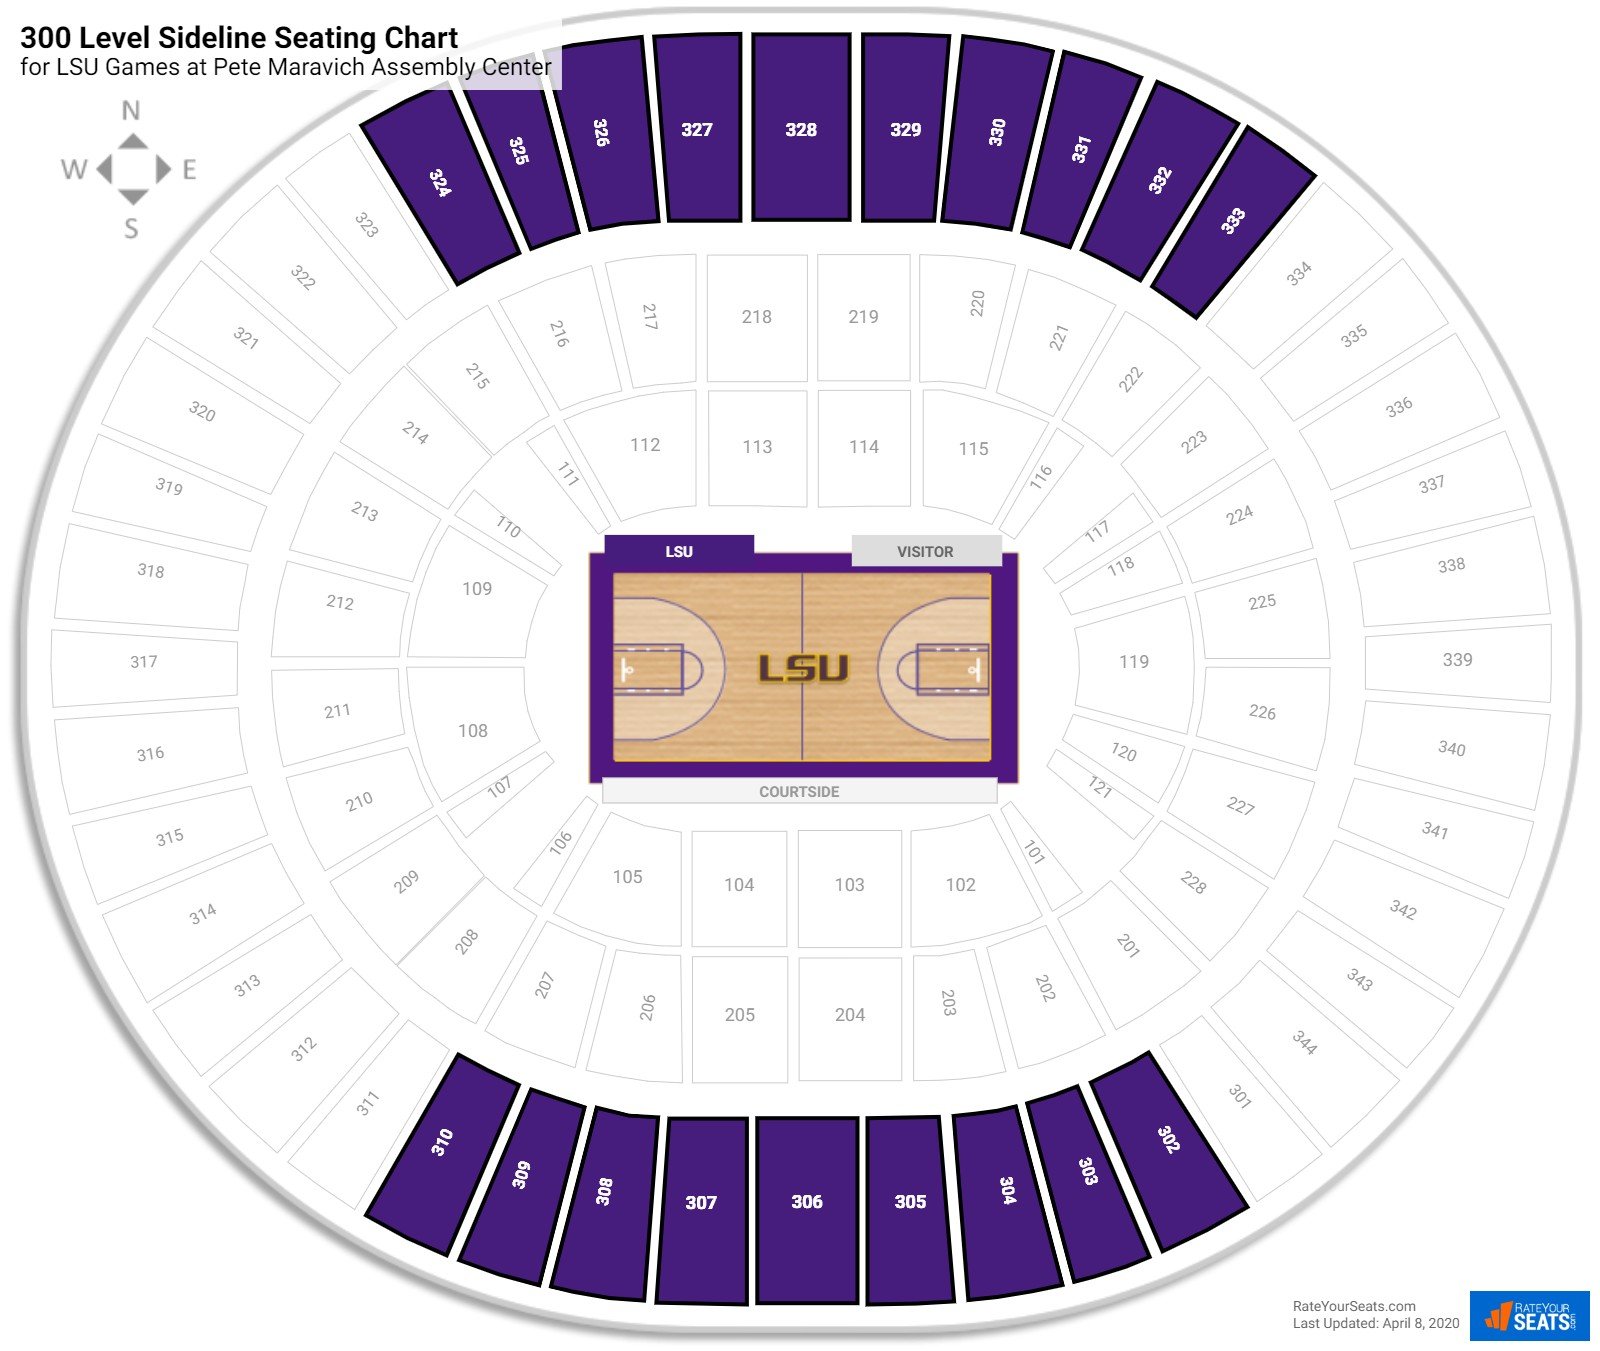 Pete Maravich Assembly Center (LSU) Seating Guide - RateYourSeats.com